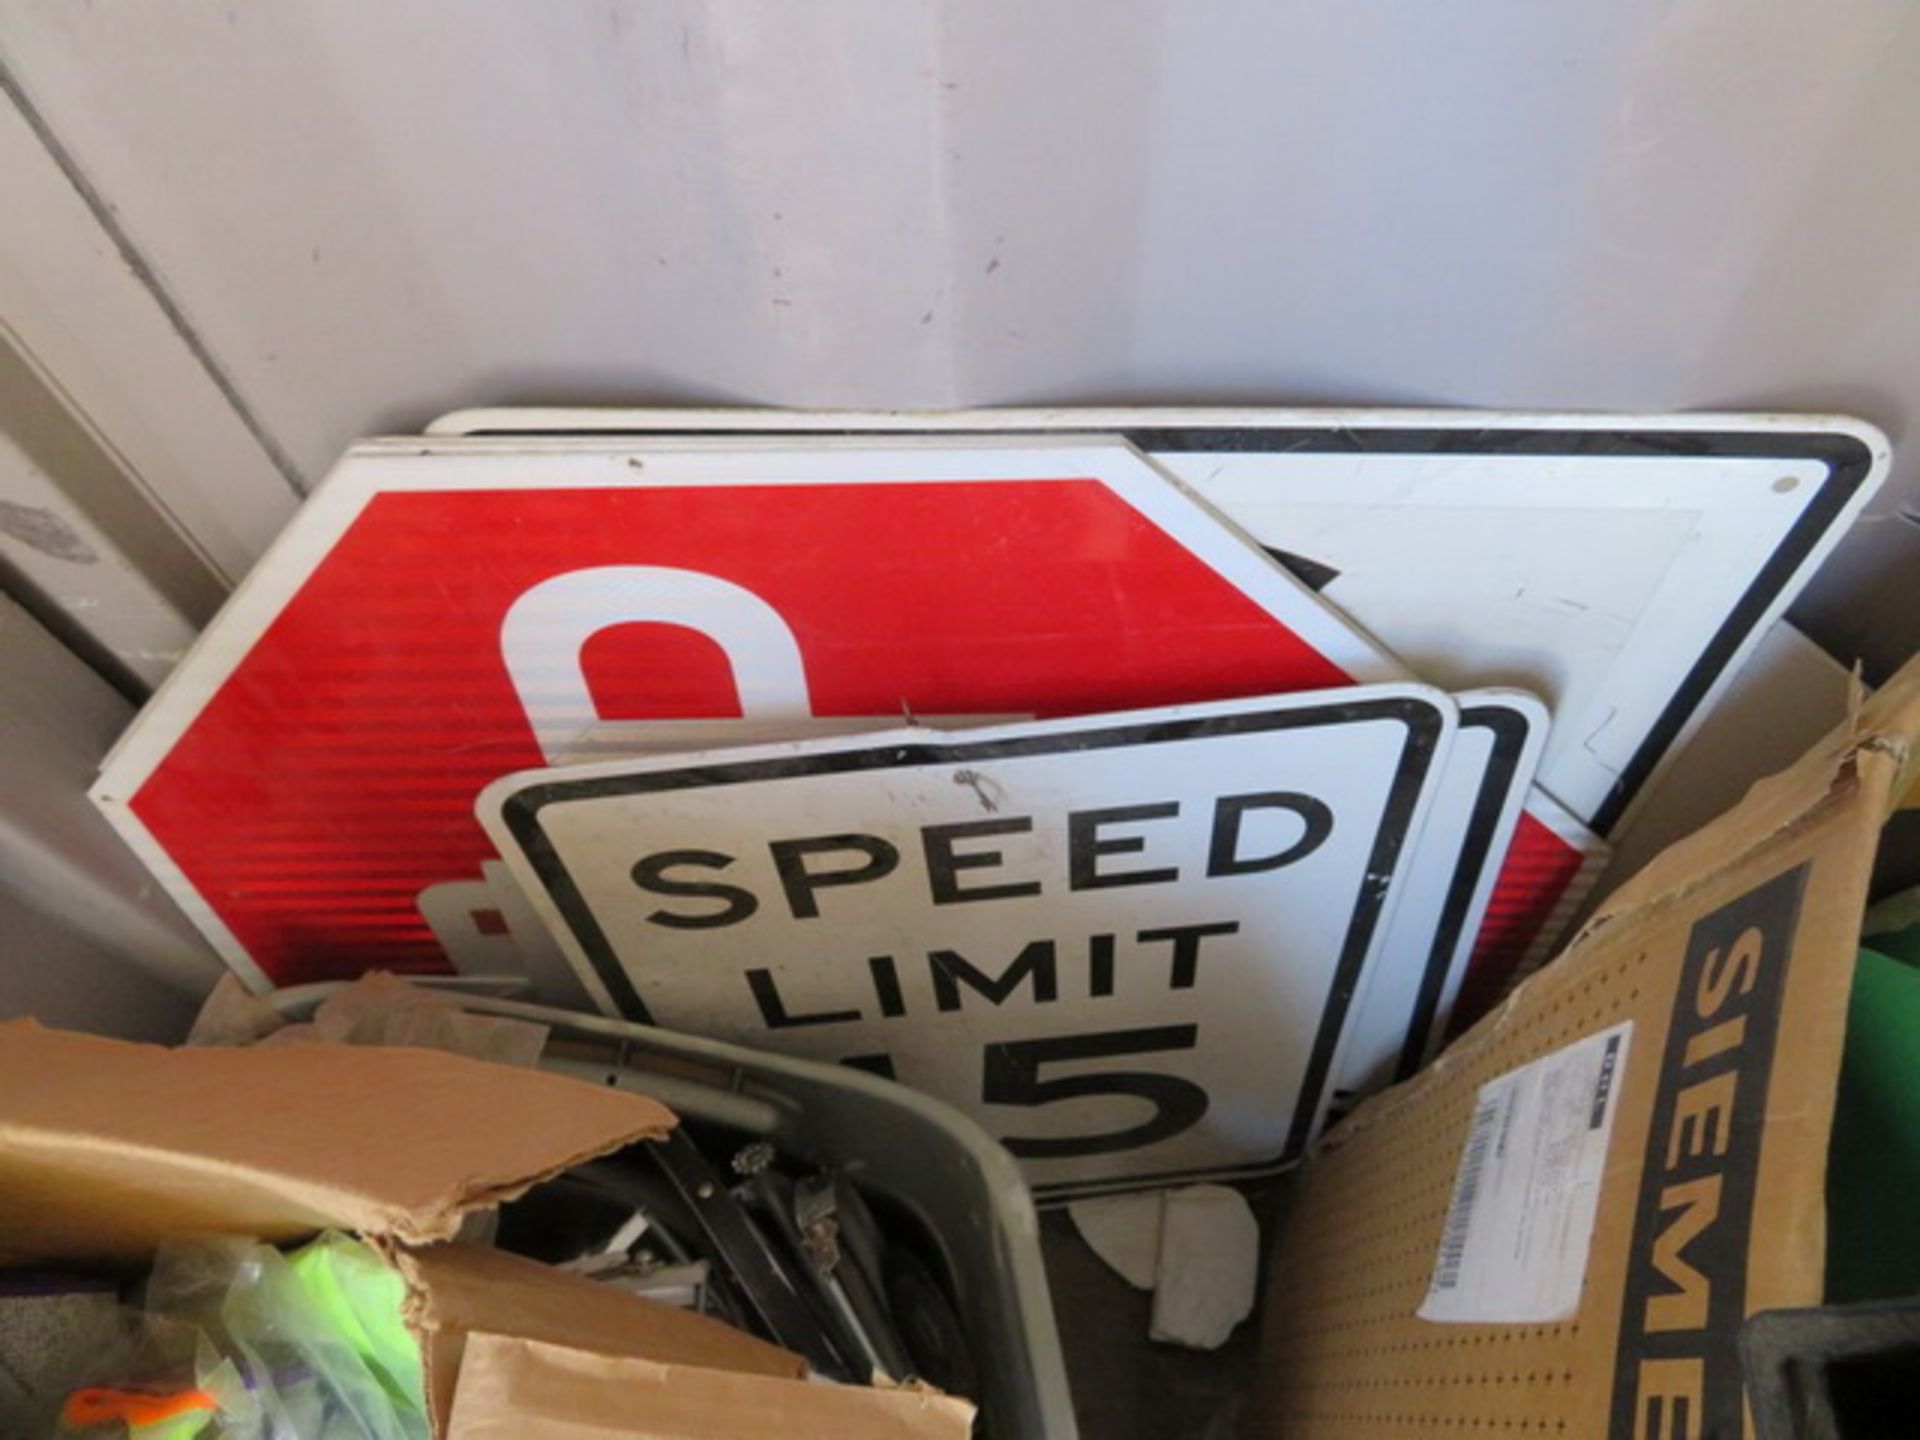 Contents of Shipping Container. To Include 1/2" PVDF Tubing, Safety Glasses, Safety Signs, - Image 4 of 51